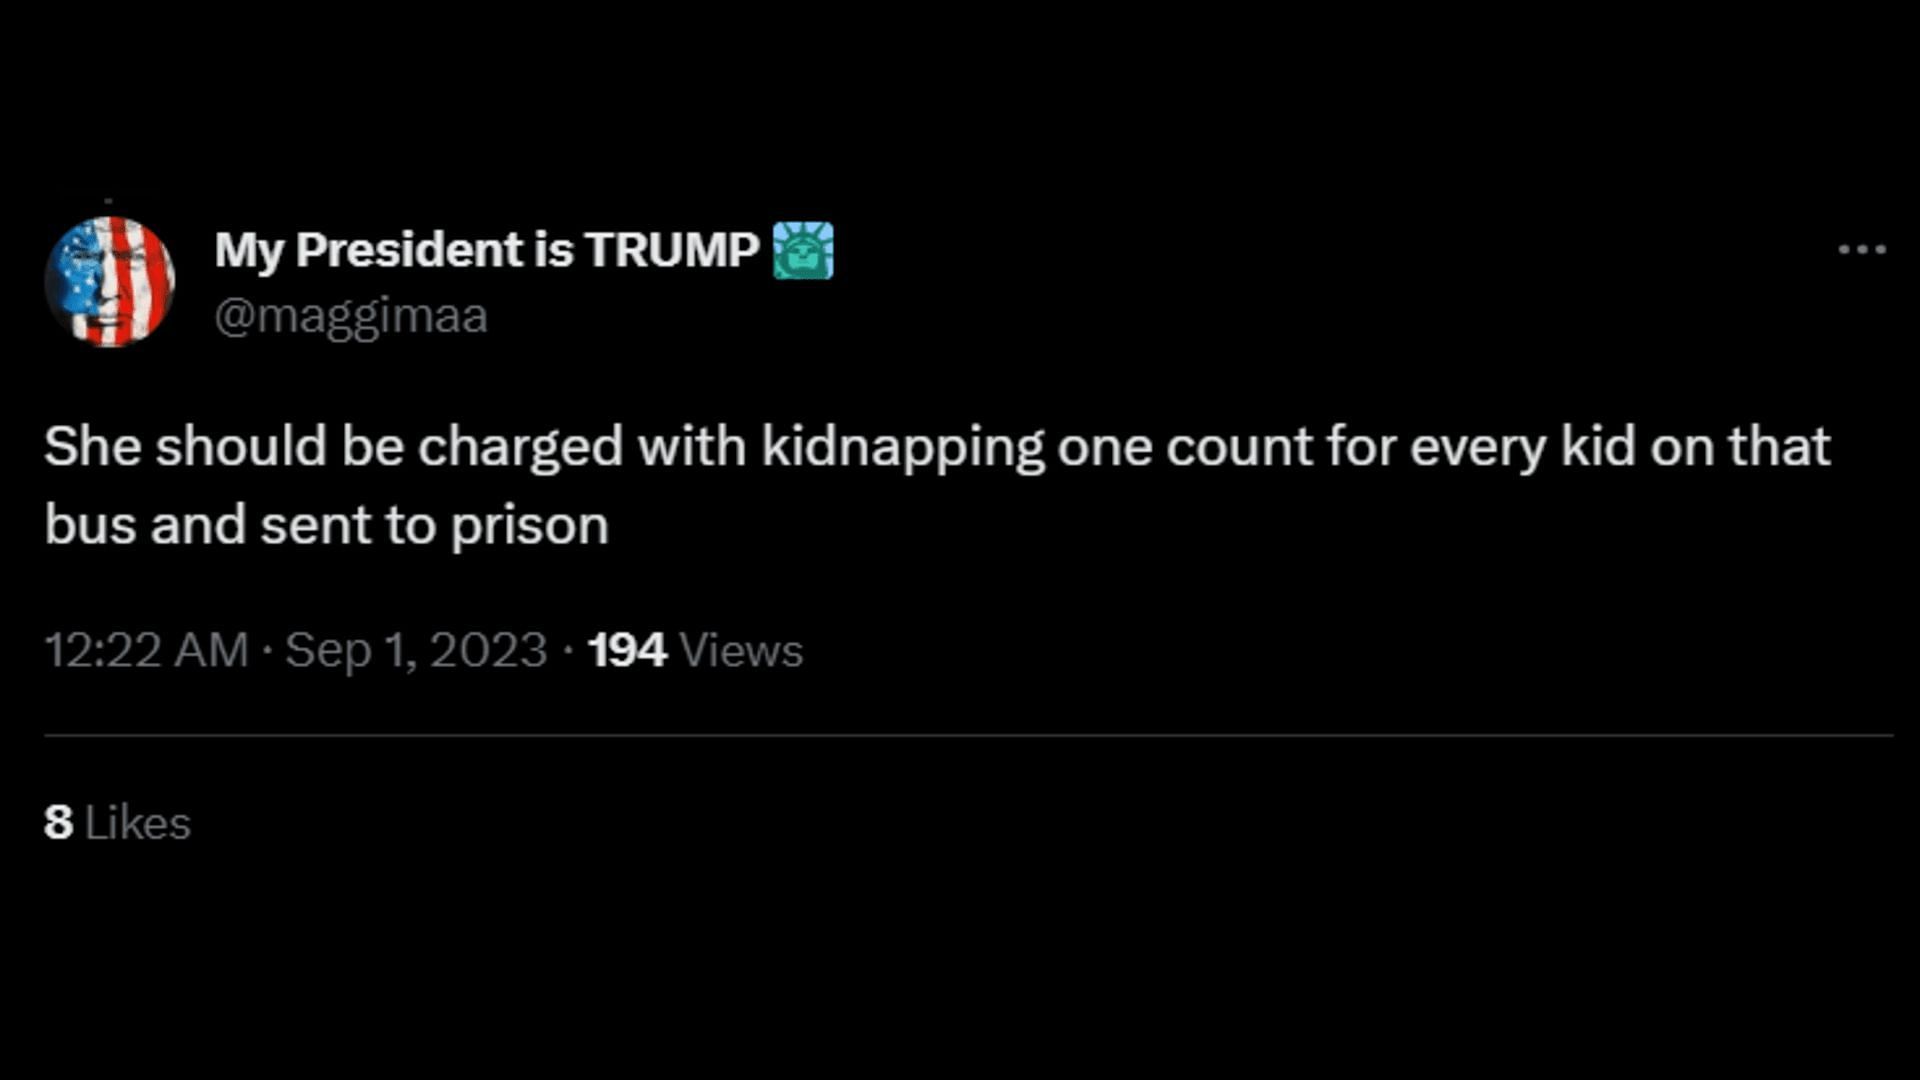 A netizen accuses the driver of kidnapping. (Image via X/My President is TRUMP)